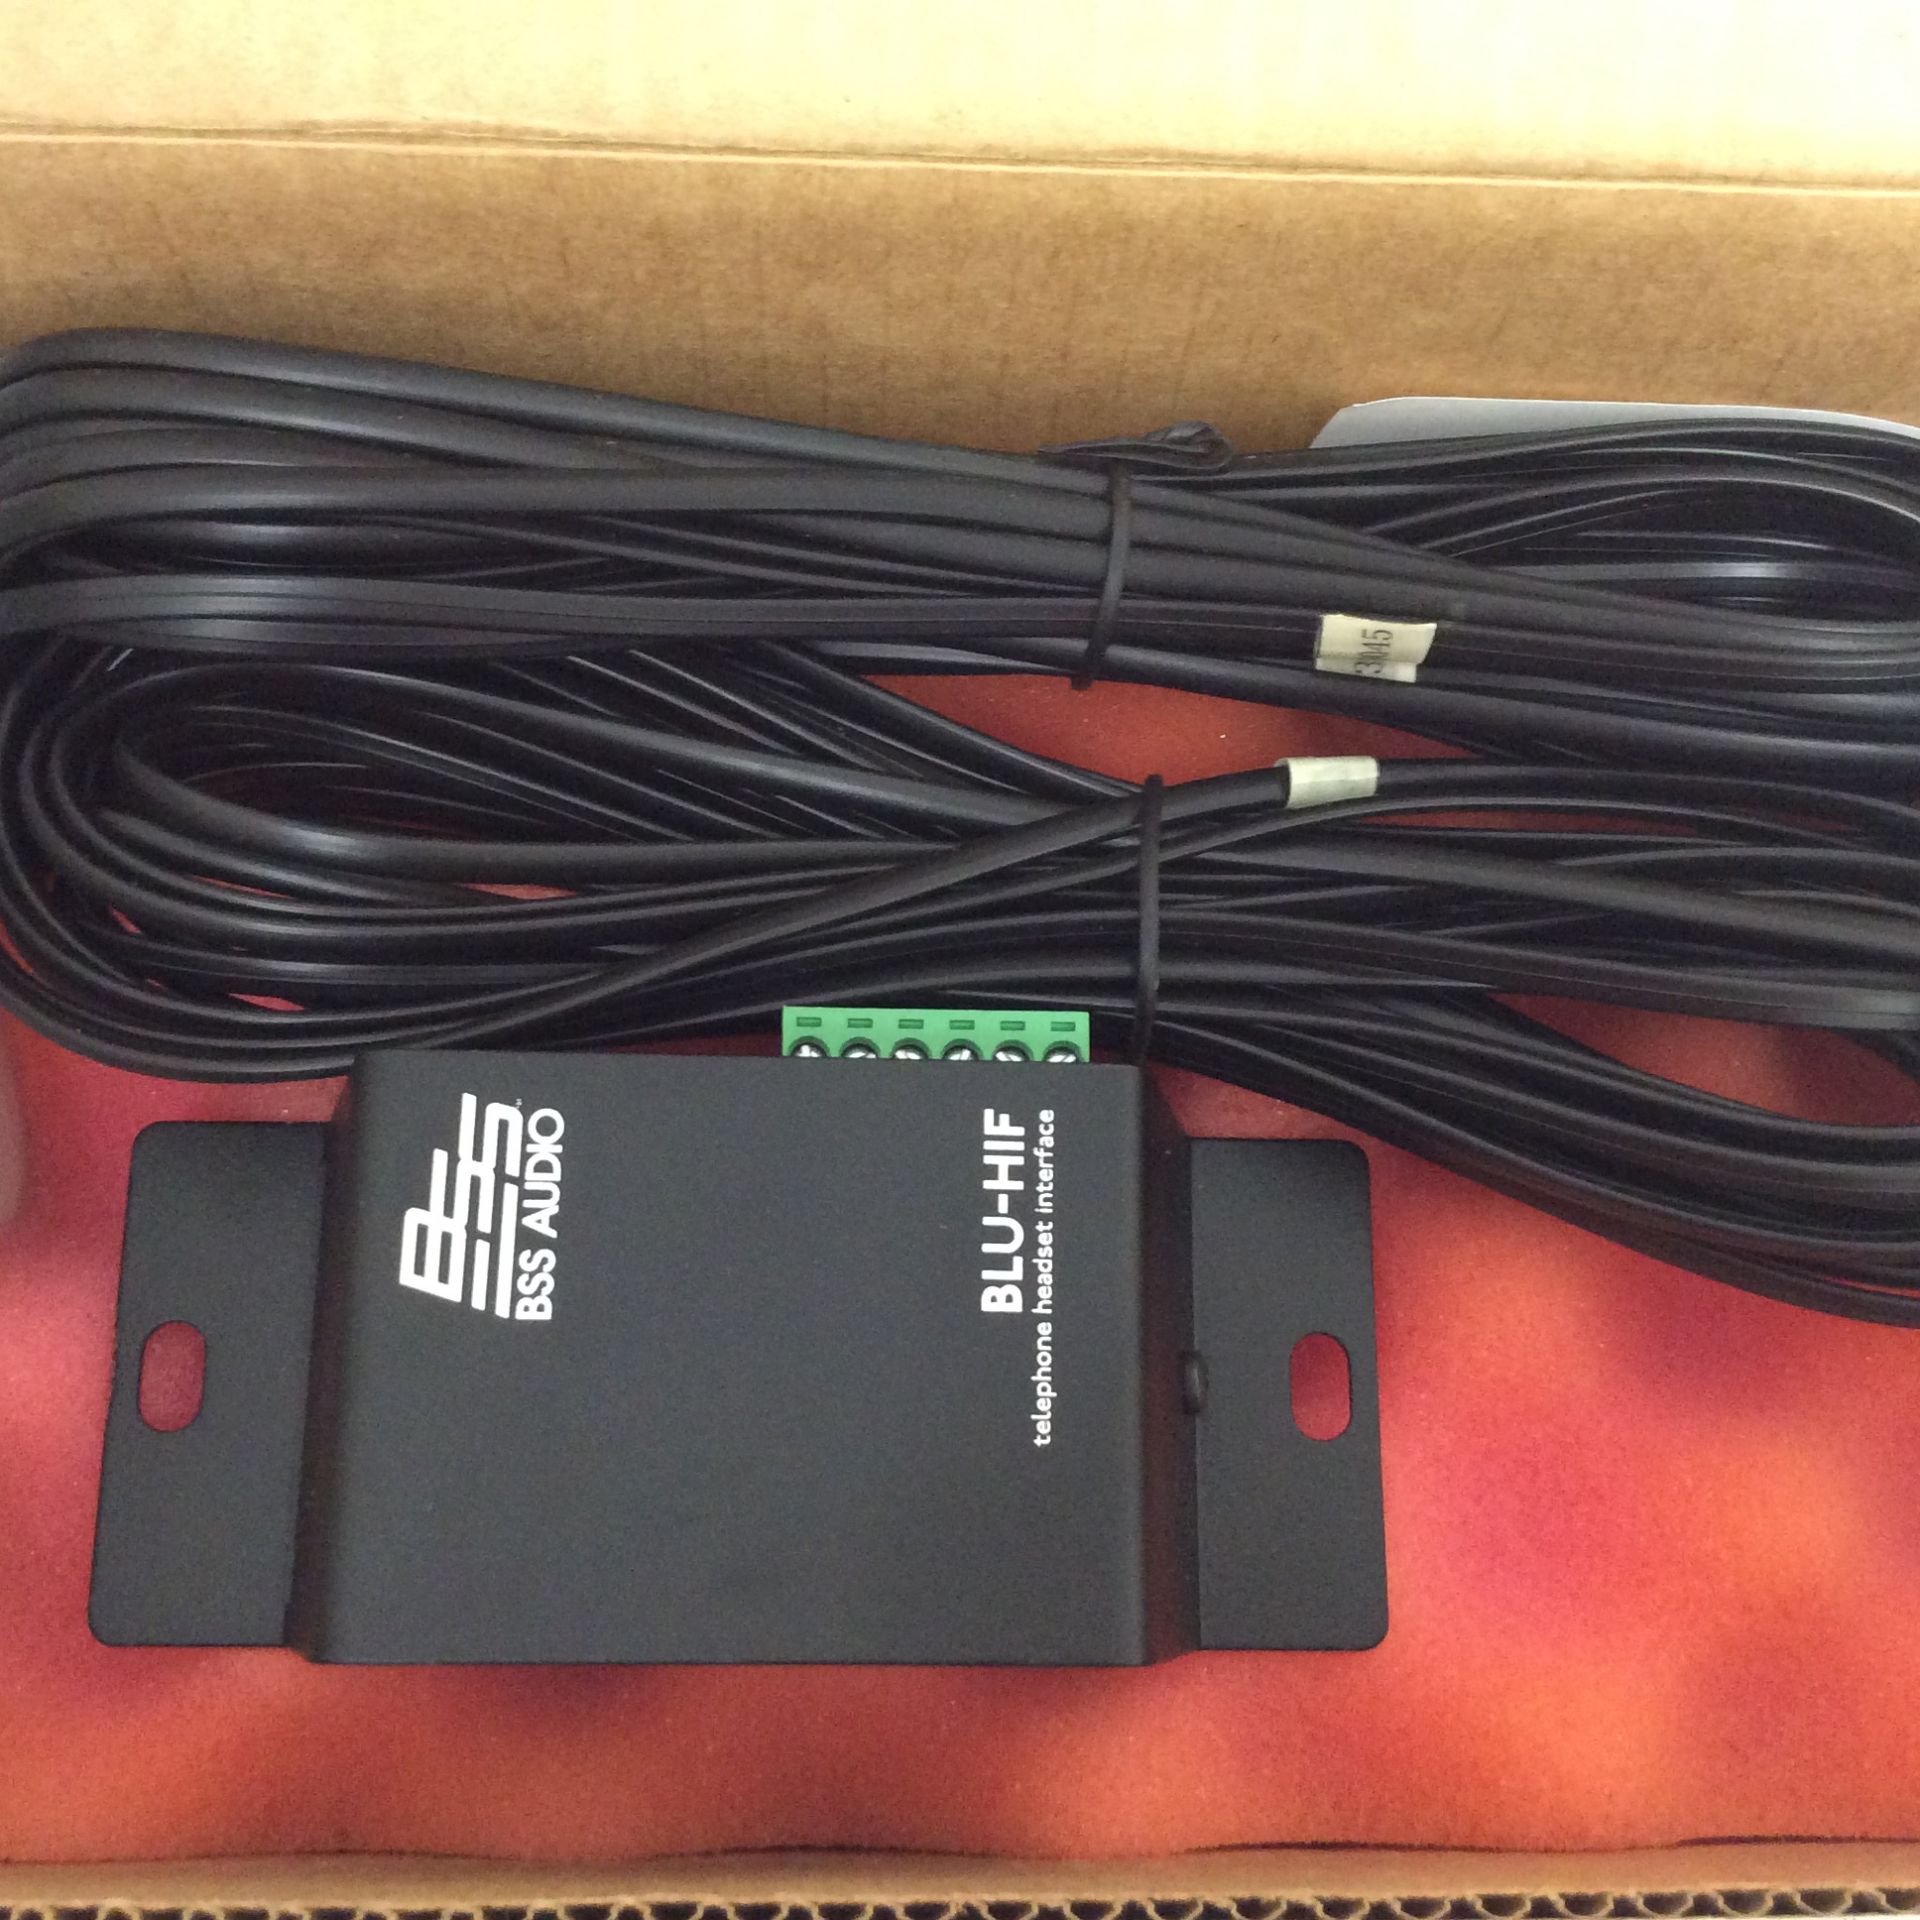 Bss audio blu-h1f telephone headset interface (boxed) - Image 2 of 2